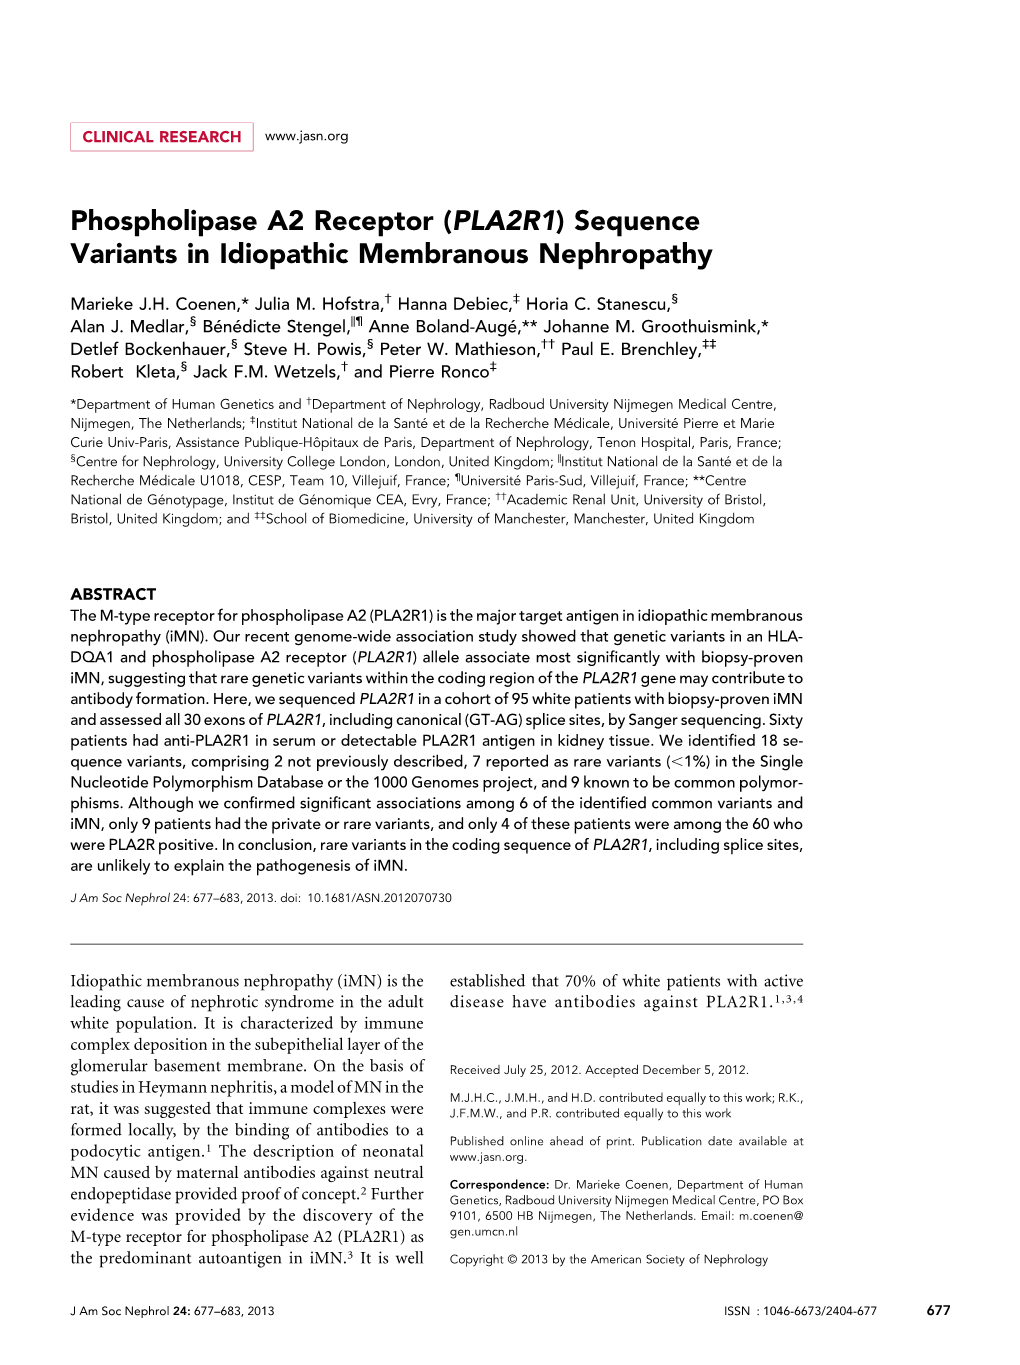 (PLA2R1) Sequence Variants in Idiopathic Membranous Nephropathy